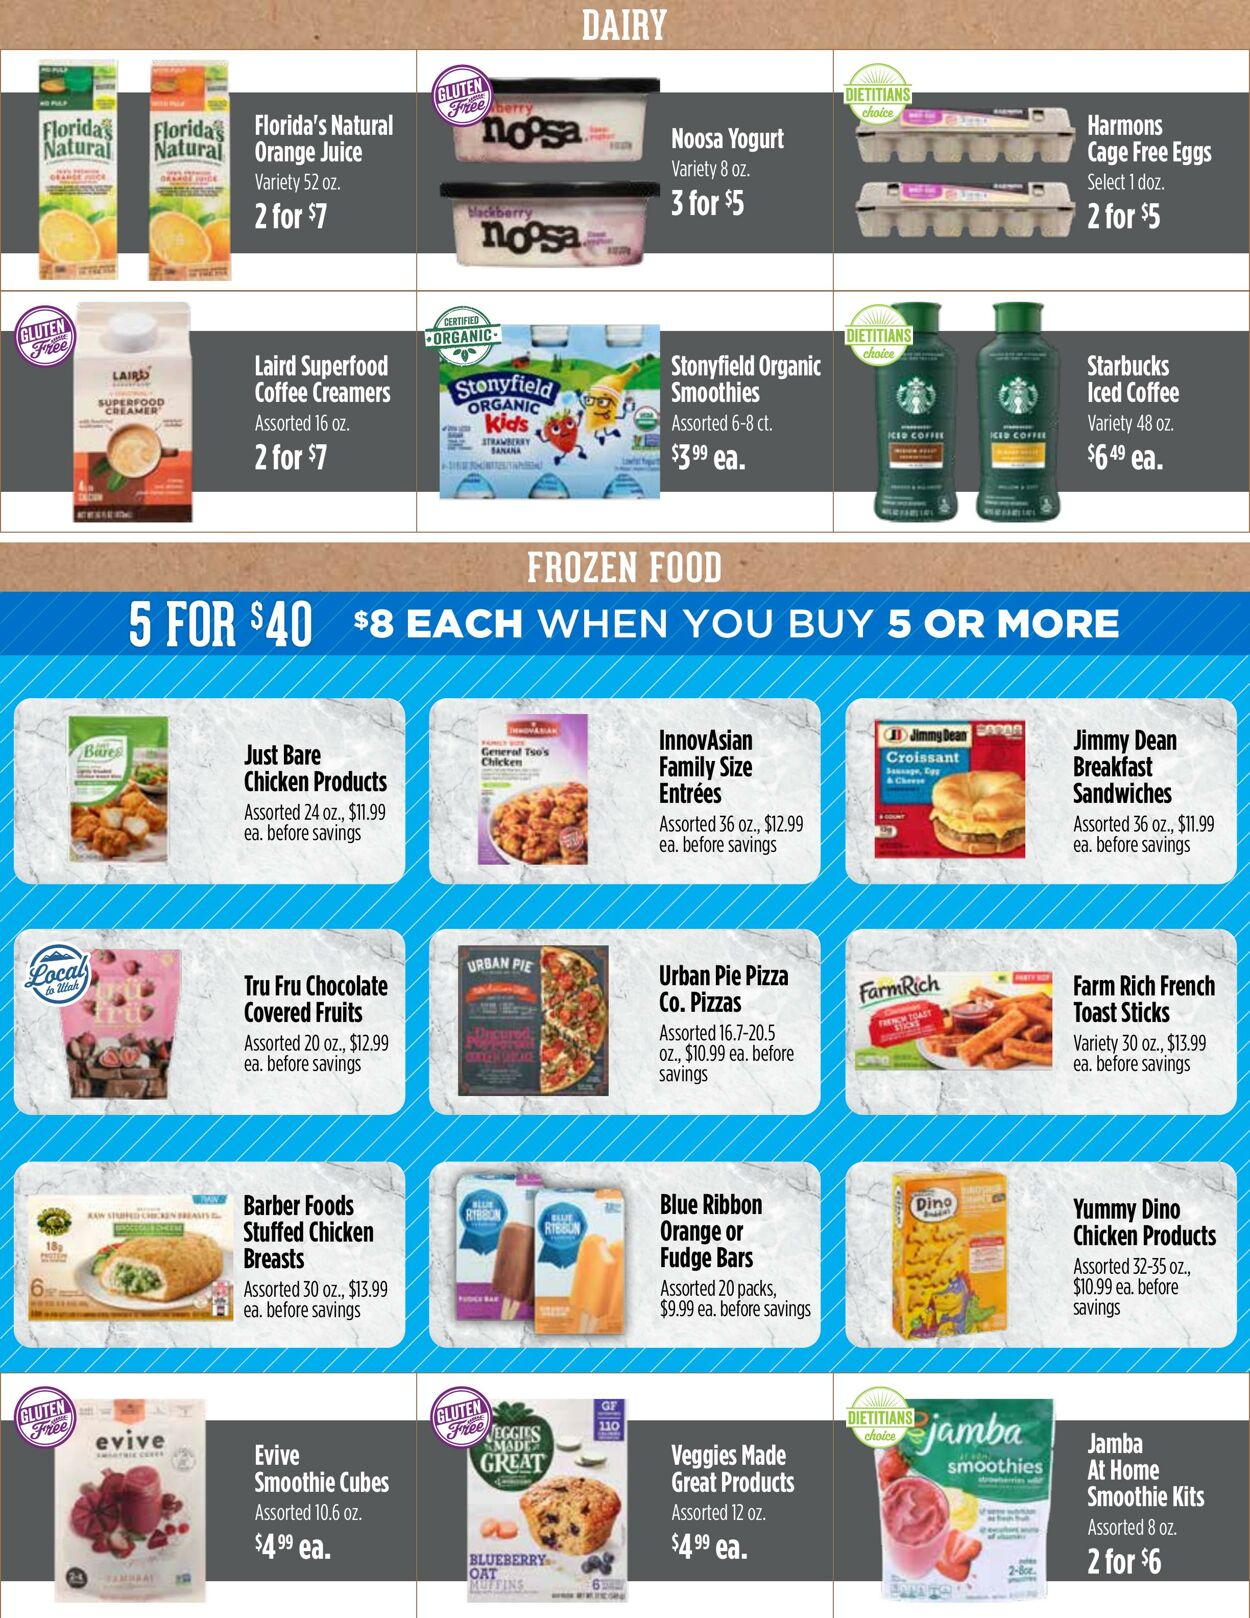 Weekly ad Harmons Grocery 01/09/2024 - 01/15/2024